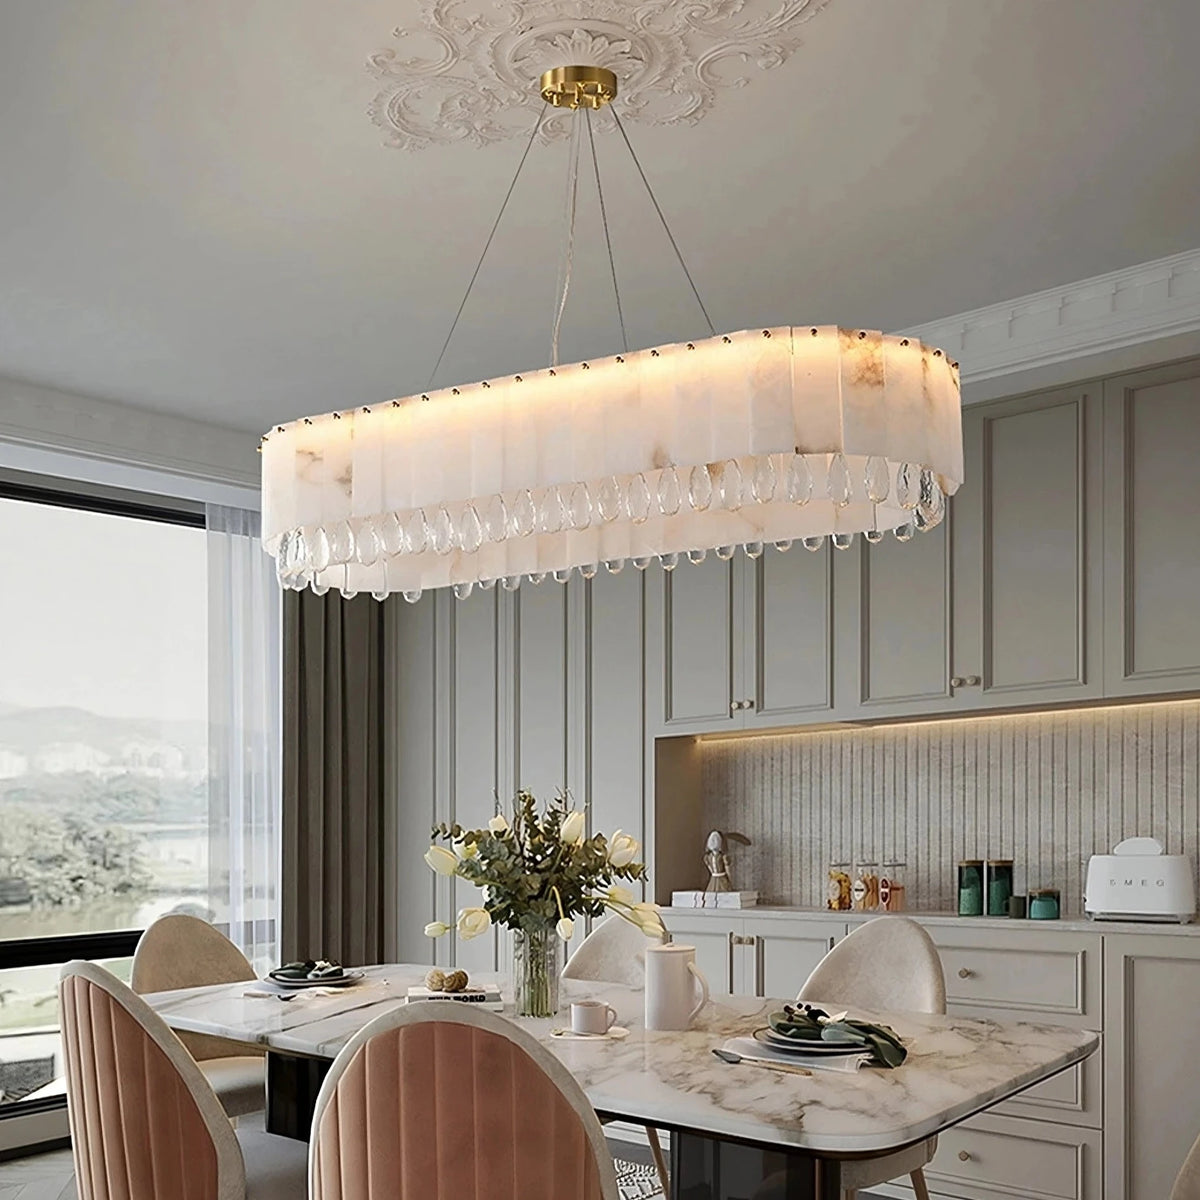 A modern dining room featuring a rectangular Spanish marble table with four pink cushioned chairs. Above the table hangs a **Morsale Natural Marble & Crystal Dining Room Chandelier**. The backdrop includes a large window with a scenic view and a built-in kitchen area with beige cabinetry.